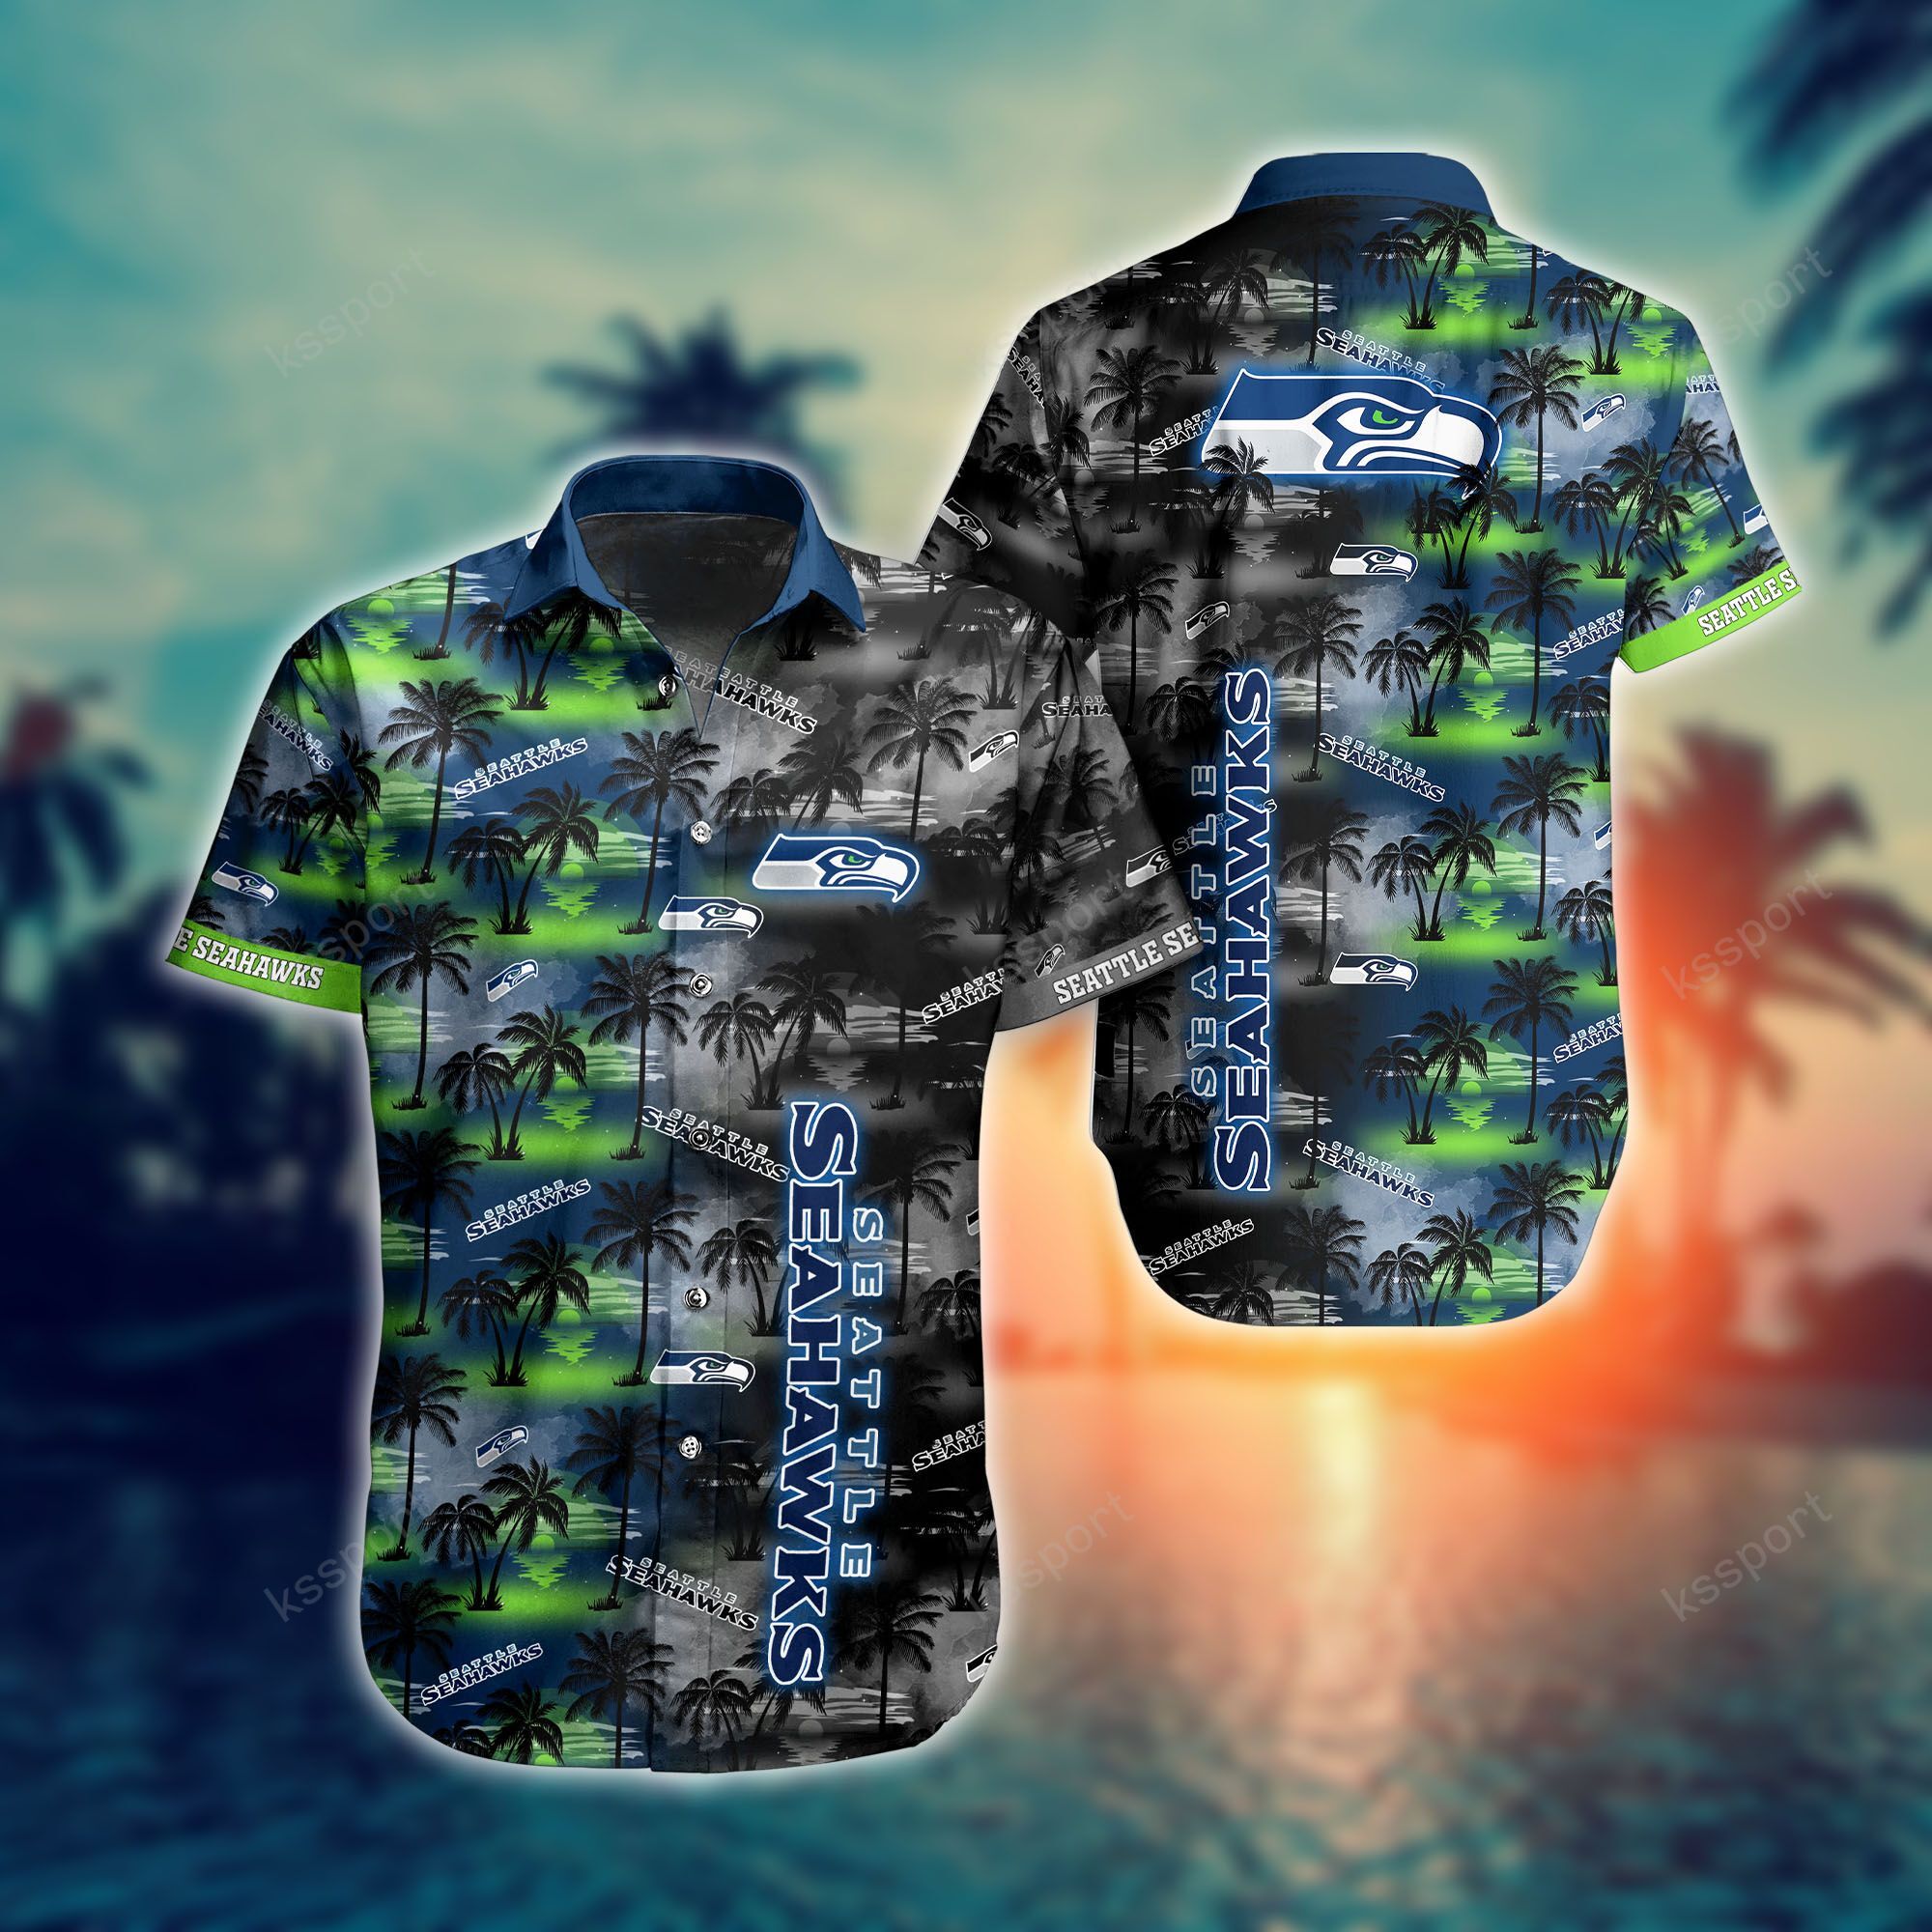 Treat yourself to a cool Hawaiian set today! 85